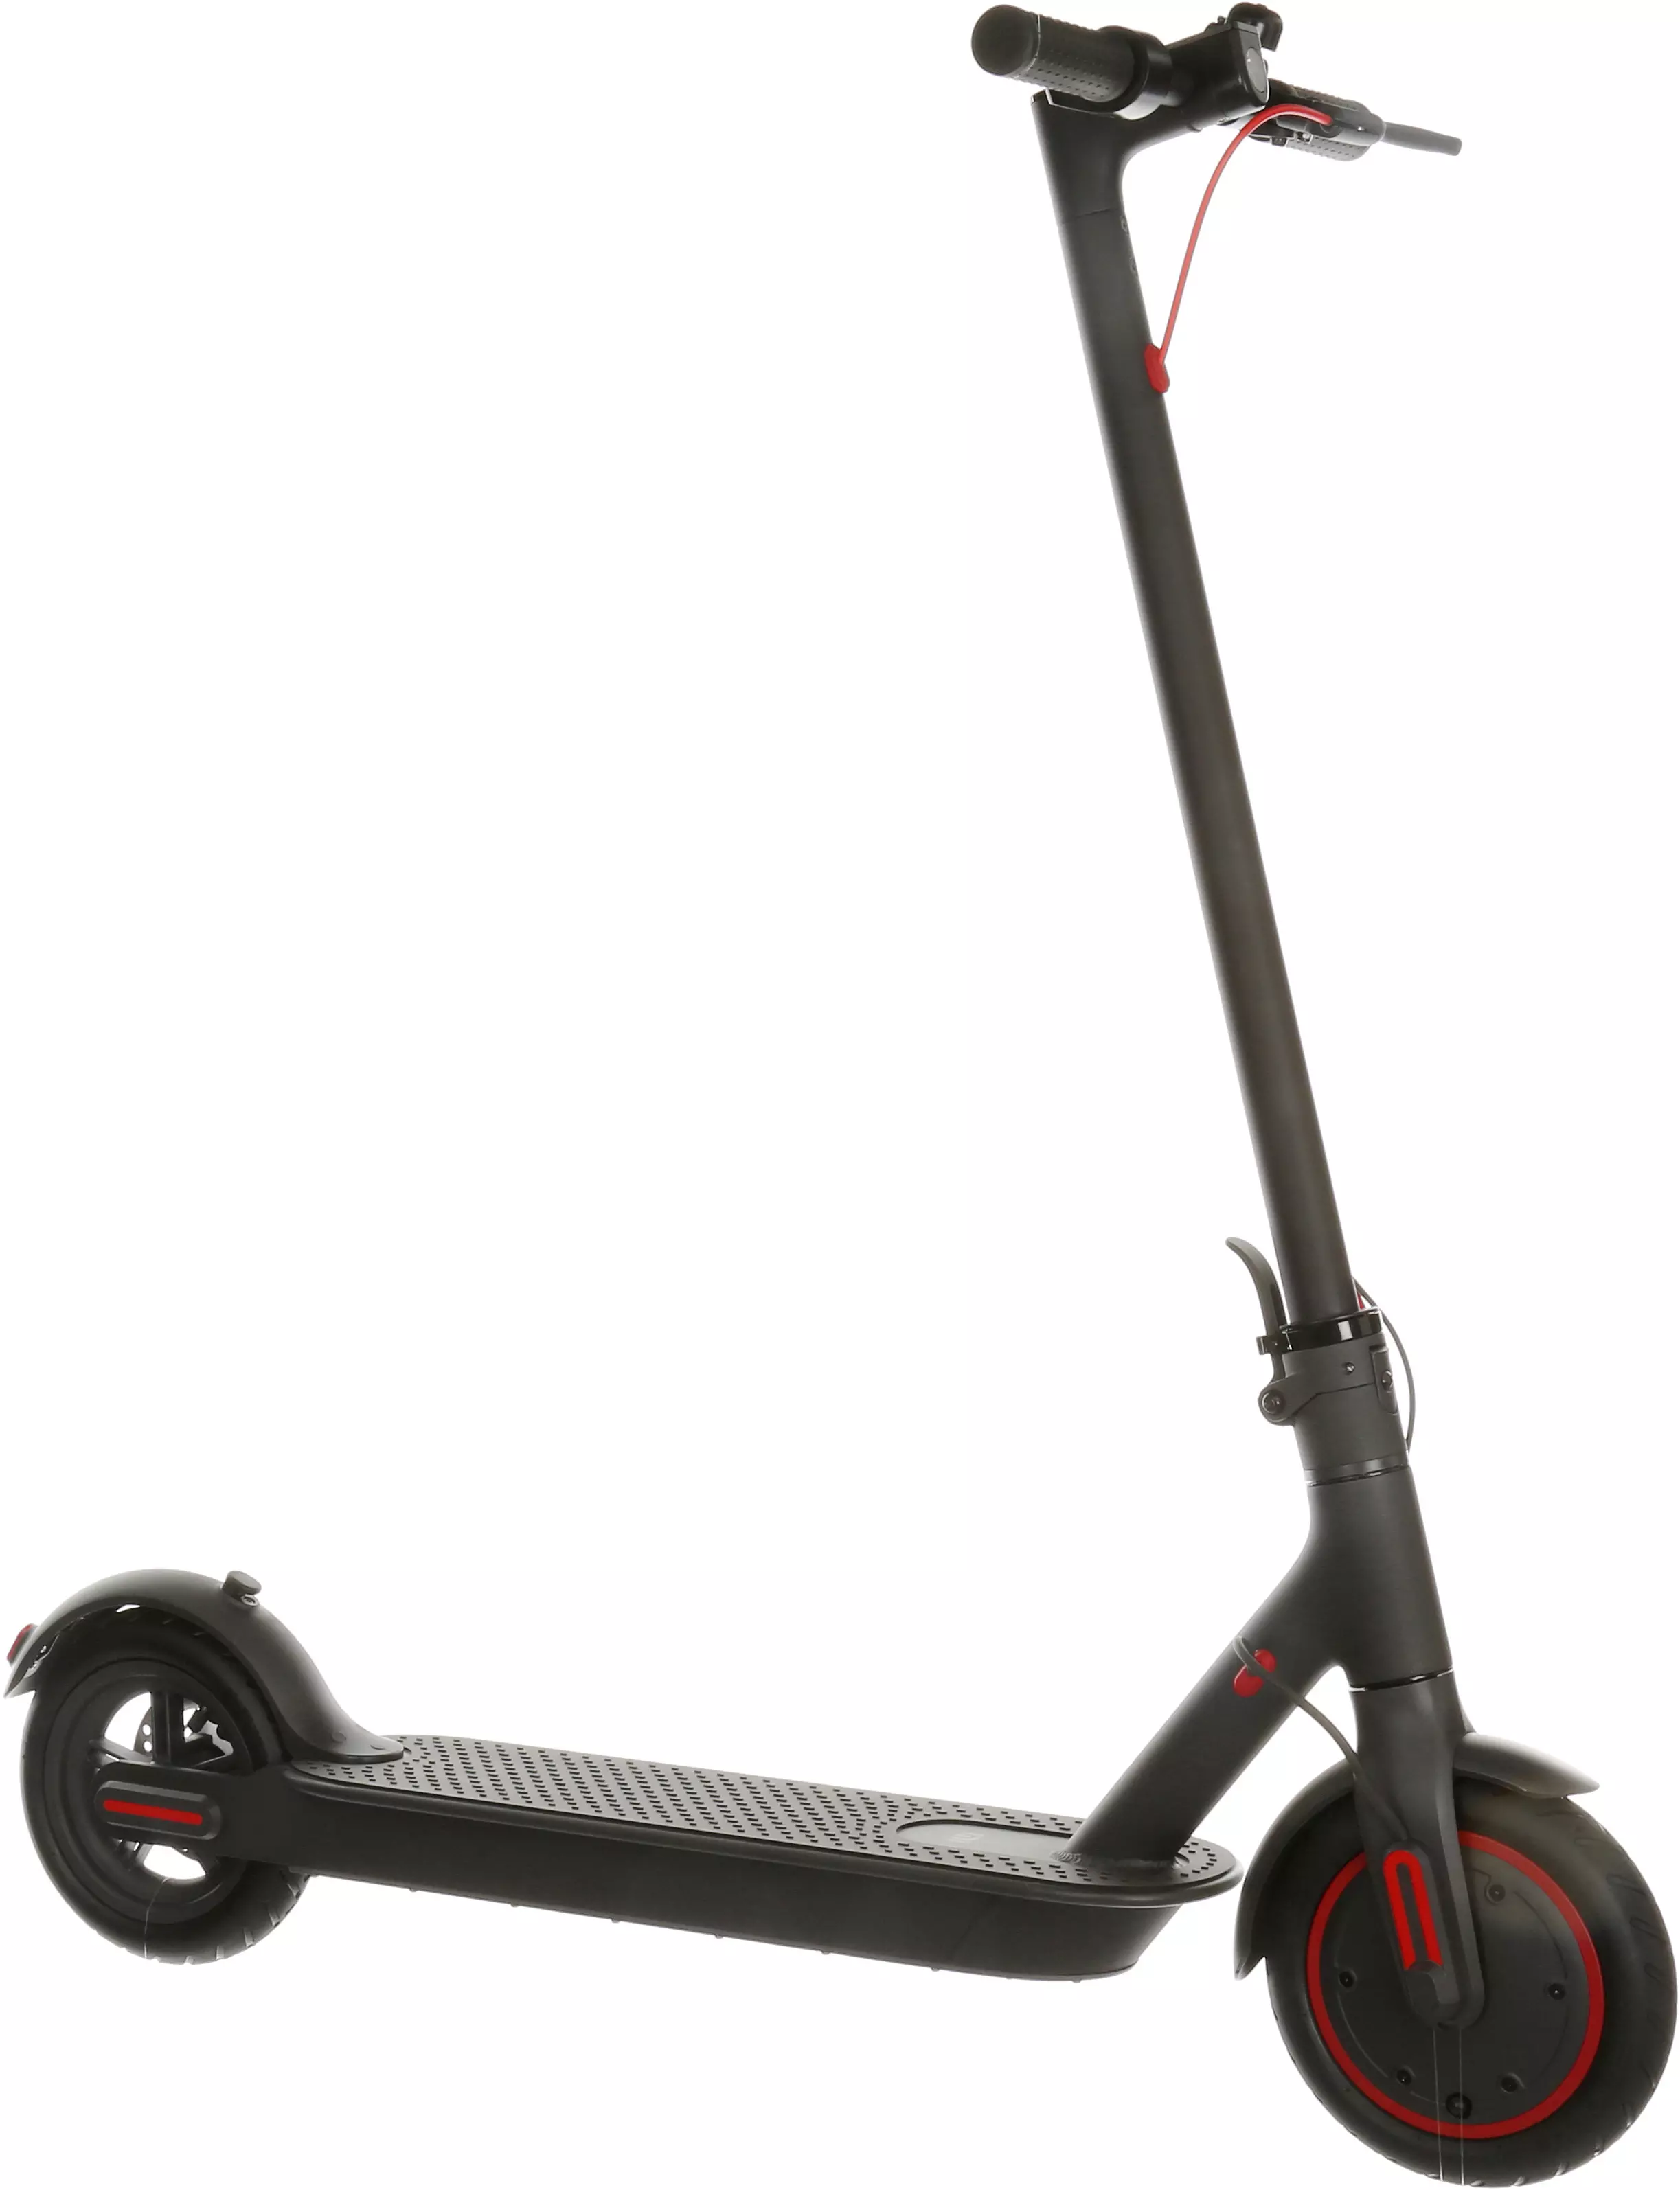 xiaomi pro scooter